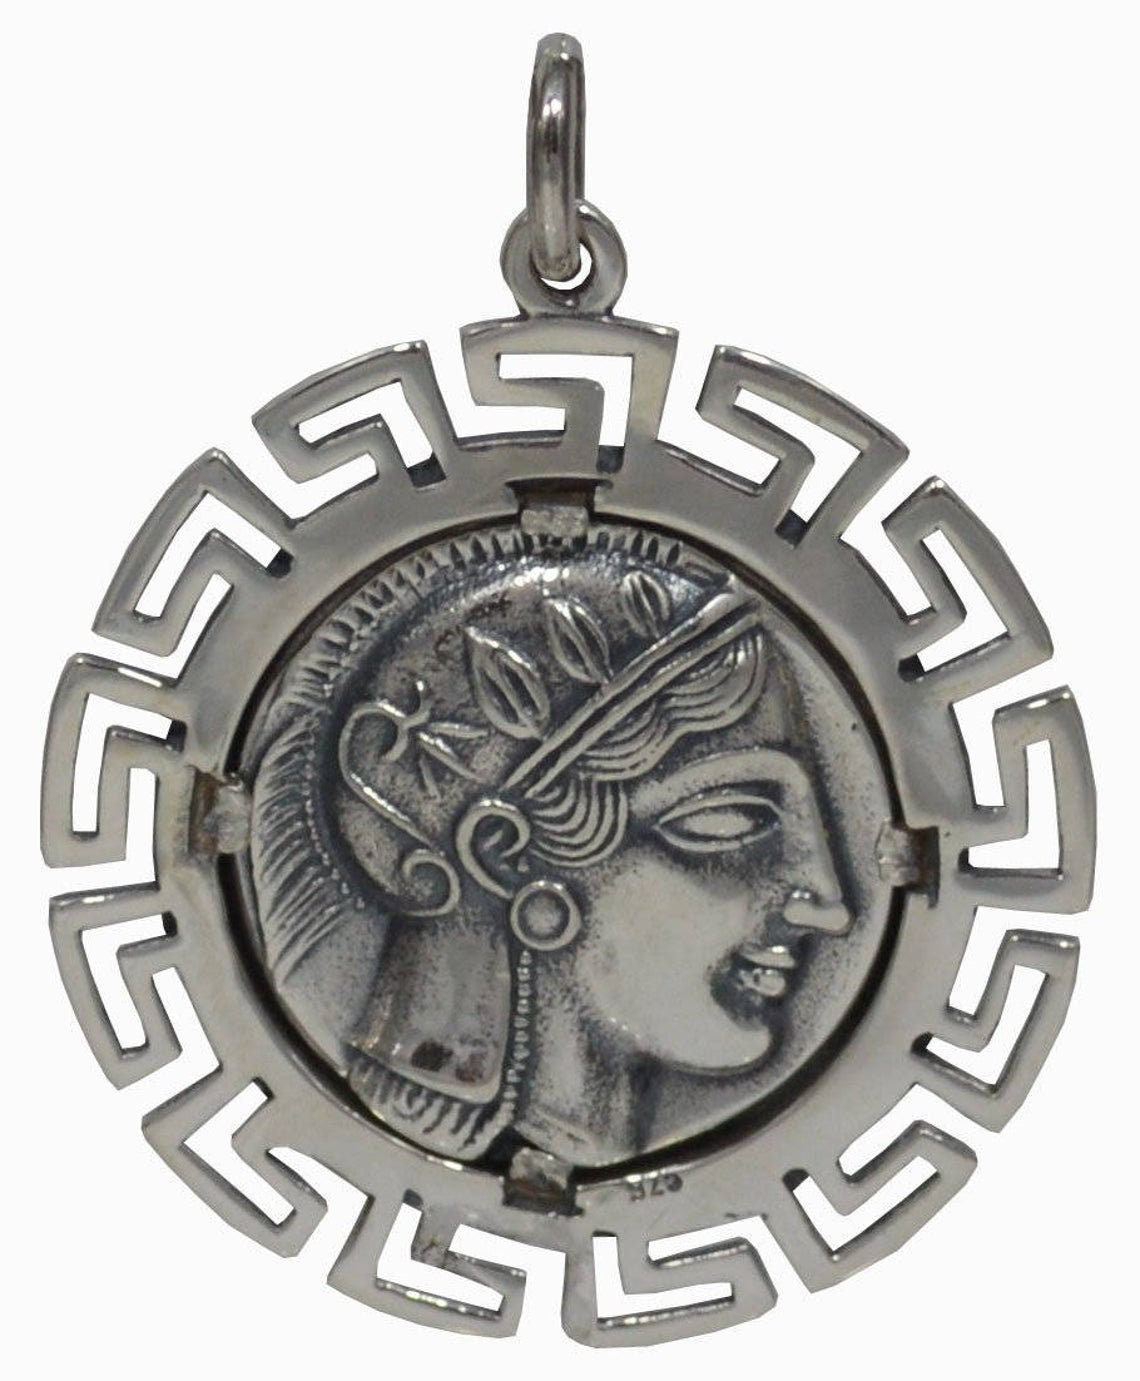 Owl Of Wisdom and Knowledge - Goddess Athena Minerva and Meander Design - Ancient Greece  - Pendant - 925 Sterling Silver